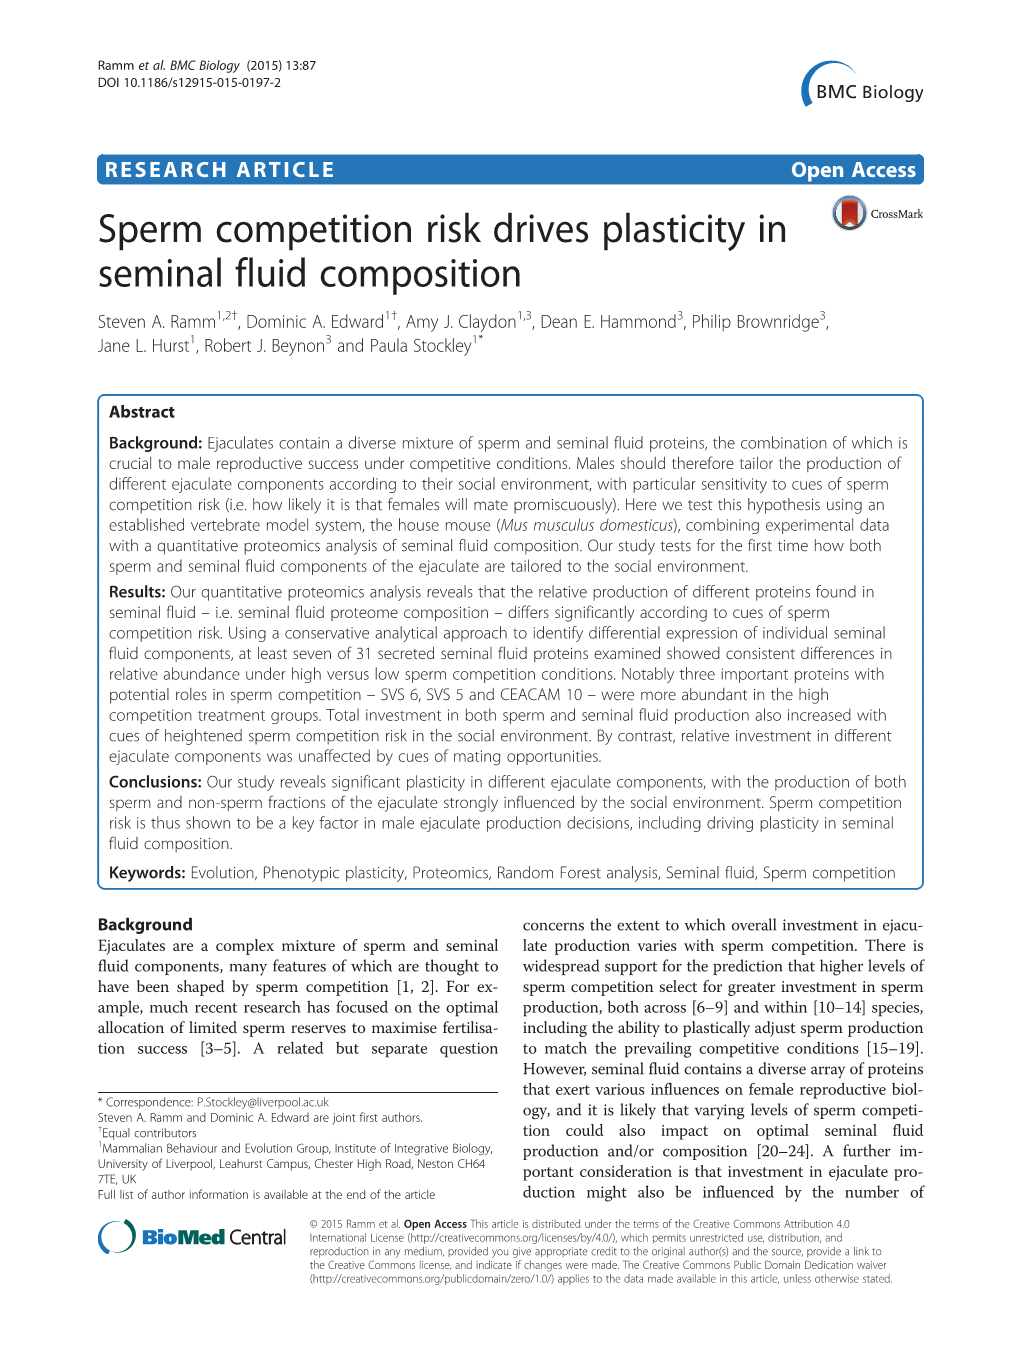 Sperm Competition Risk Drives Plasticity in Seminal Fluid Composition Steven A